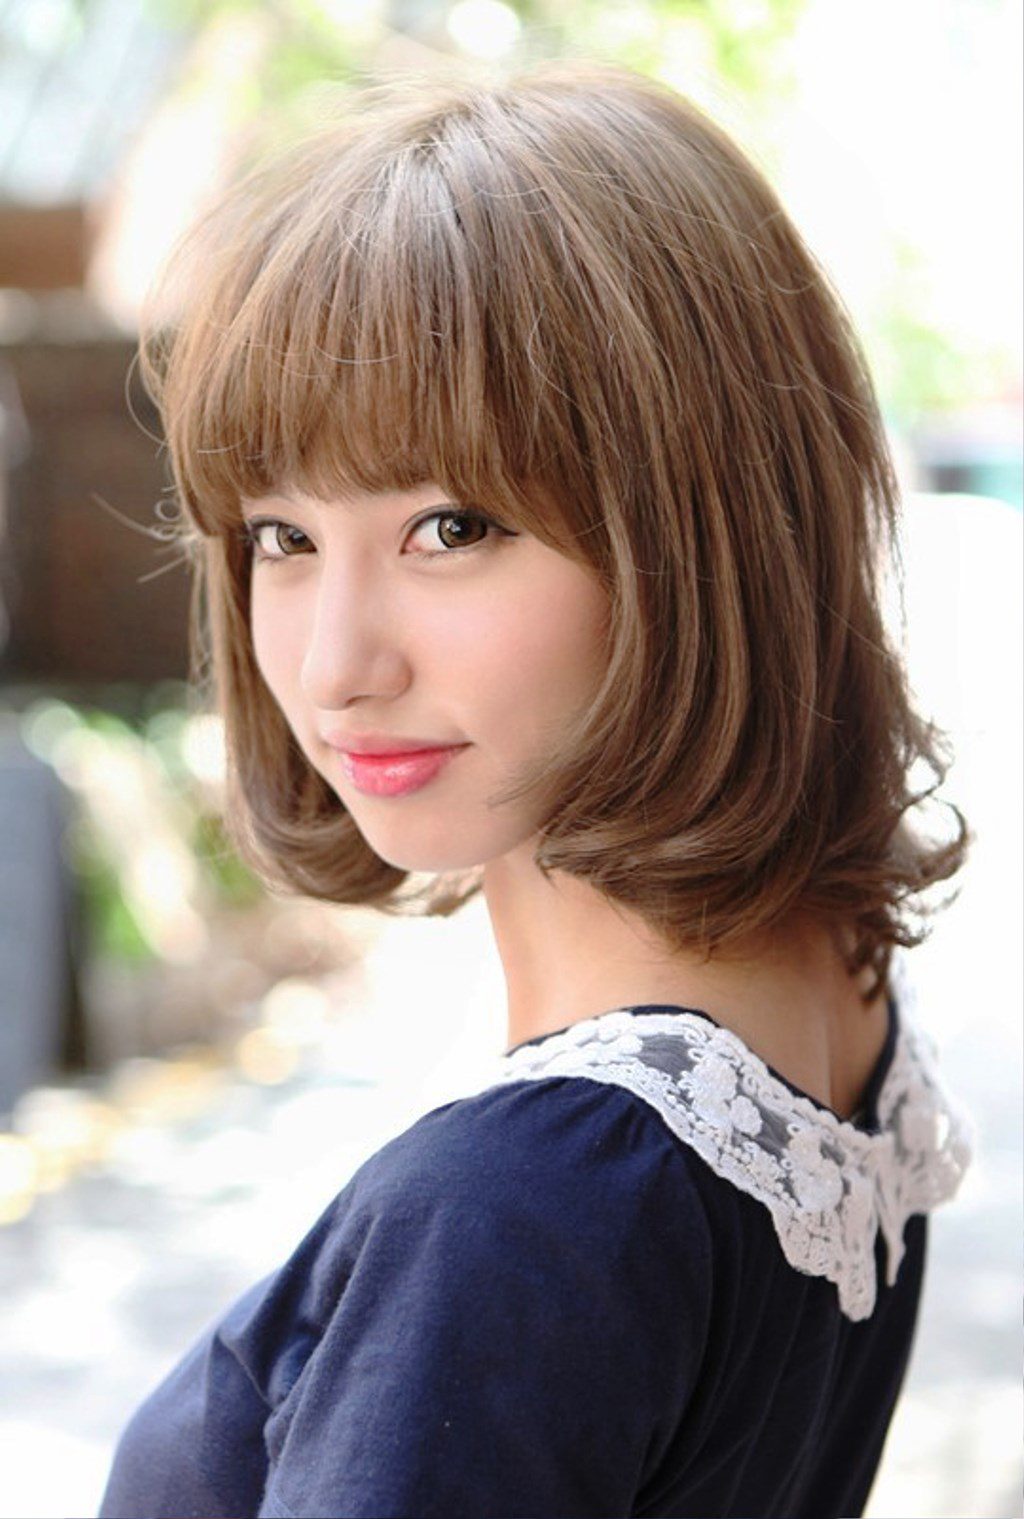 Cute Japanese Bob Hairstyle With Blunt Bangs1